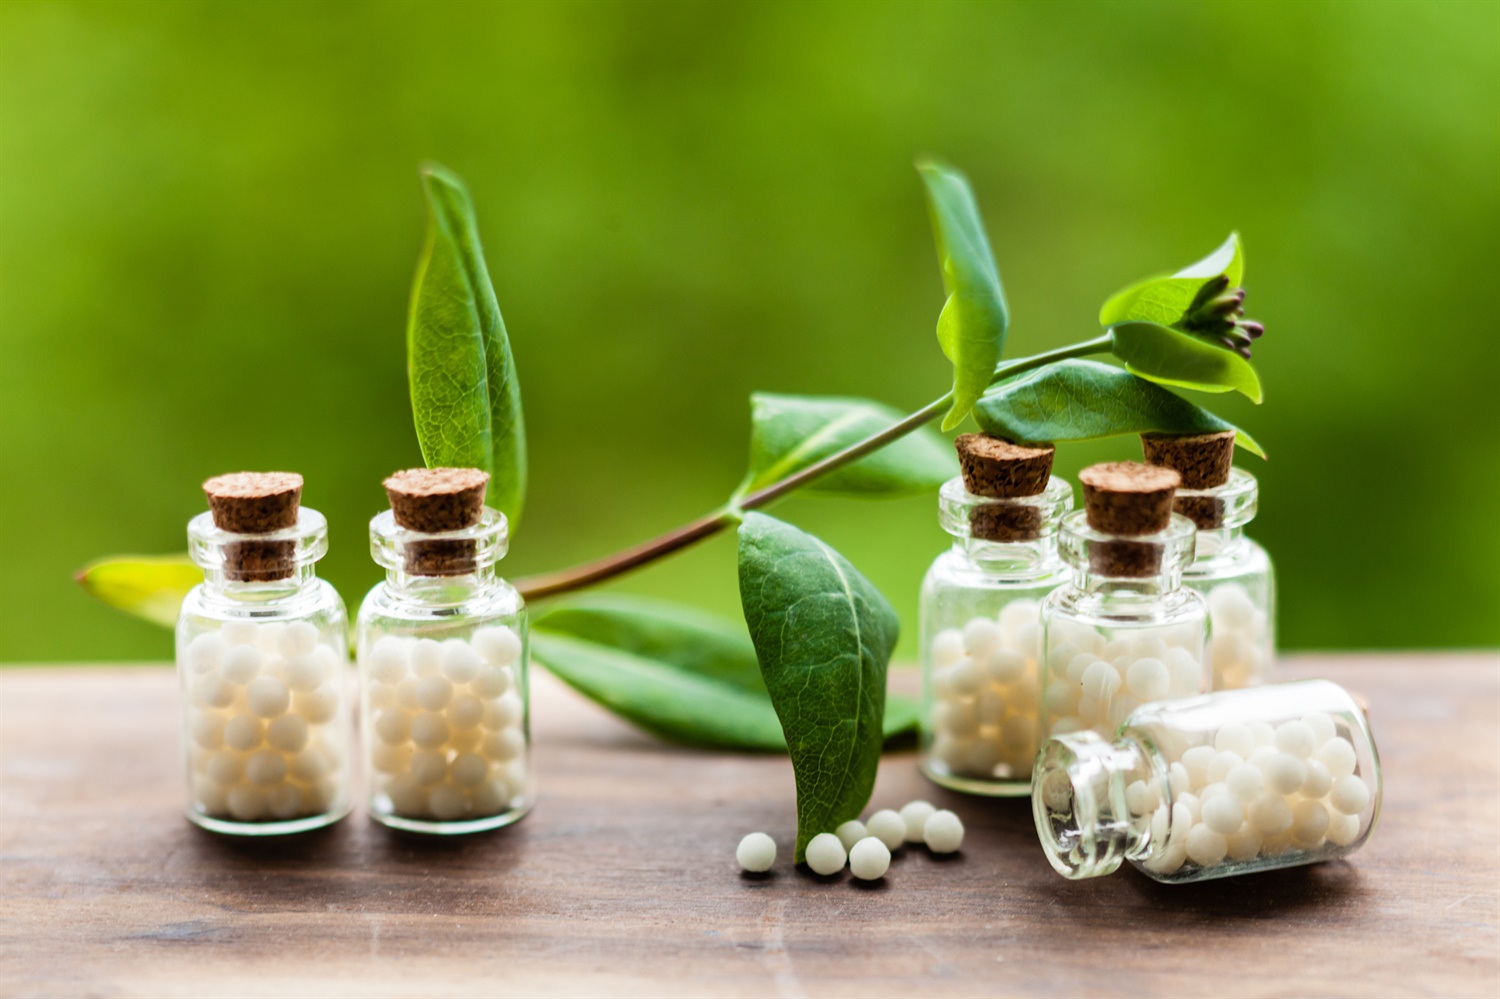 homeopathy-no-longer-available-in-nhs-in-england-as-last-ccg-ends-funding